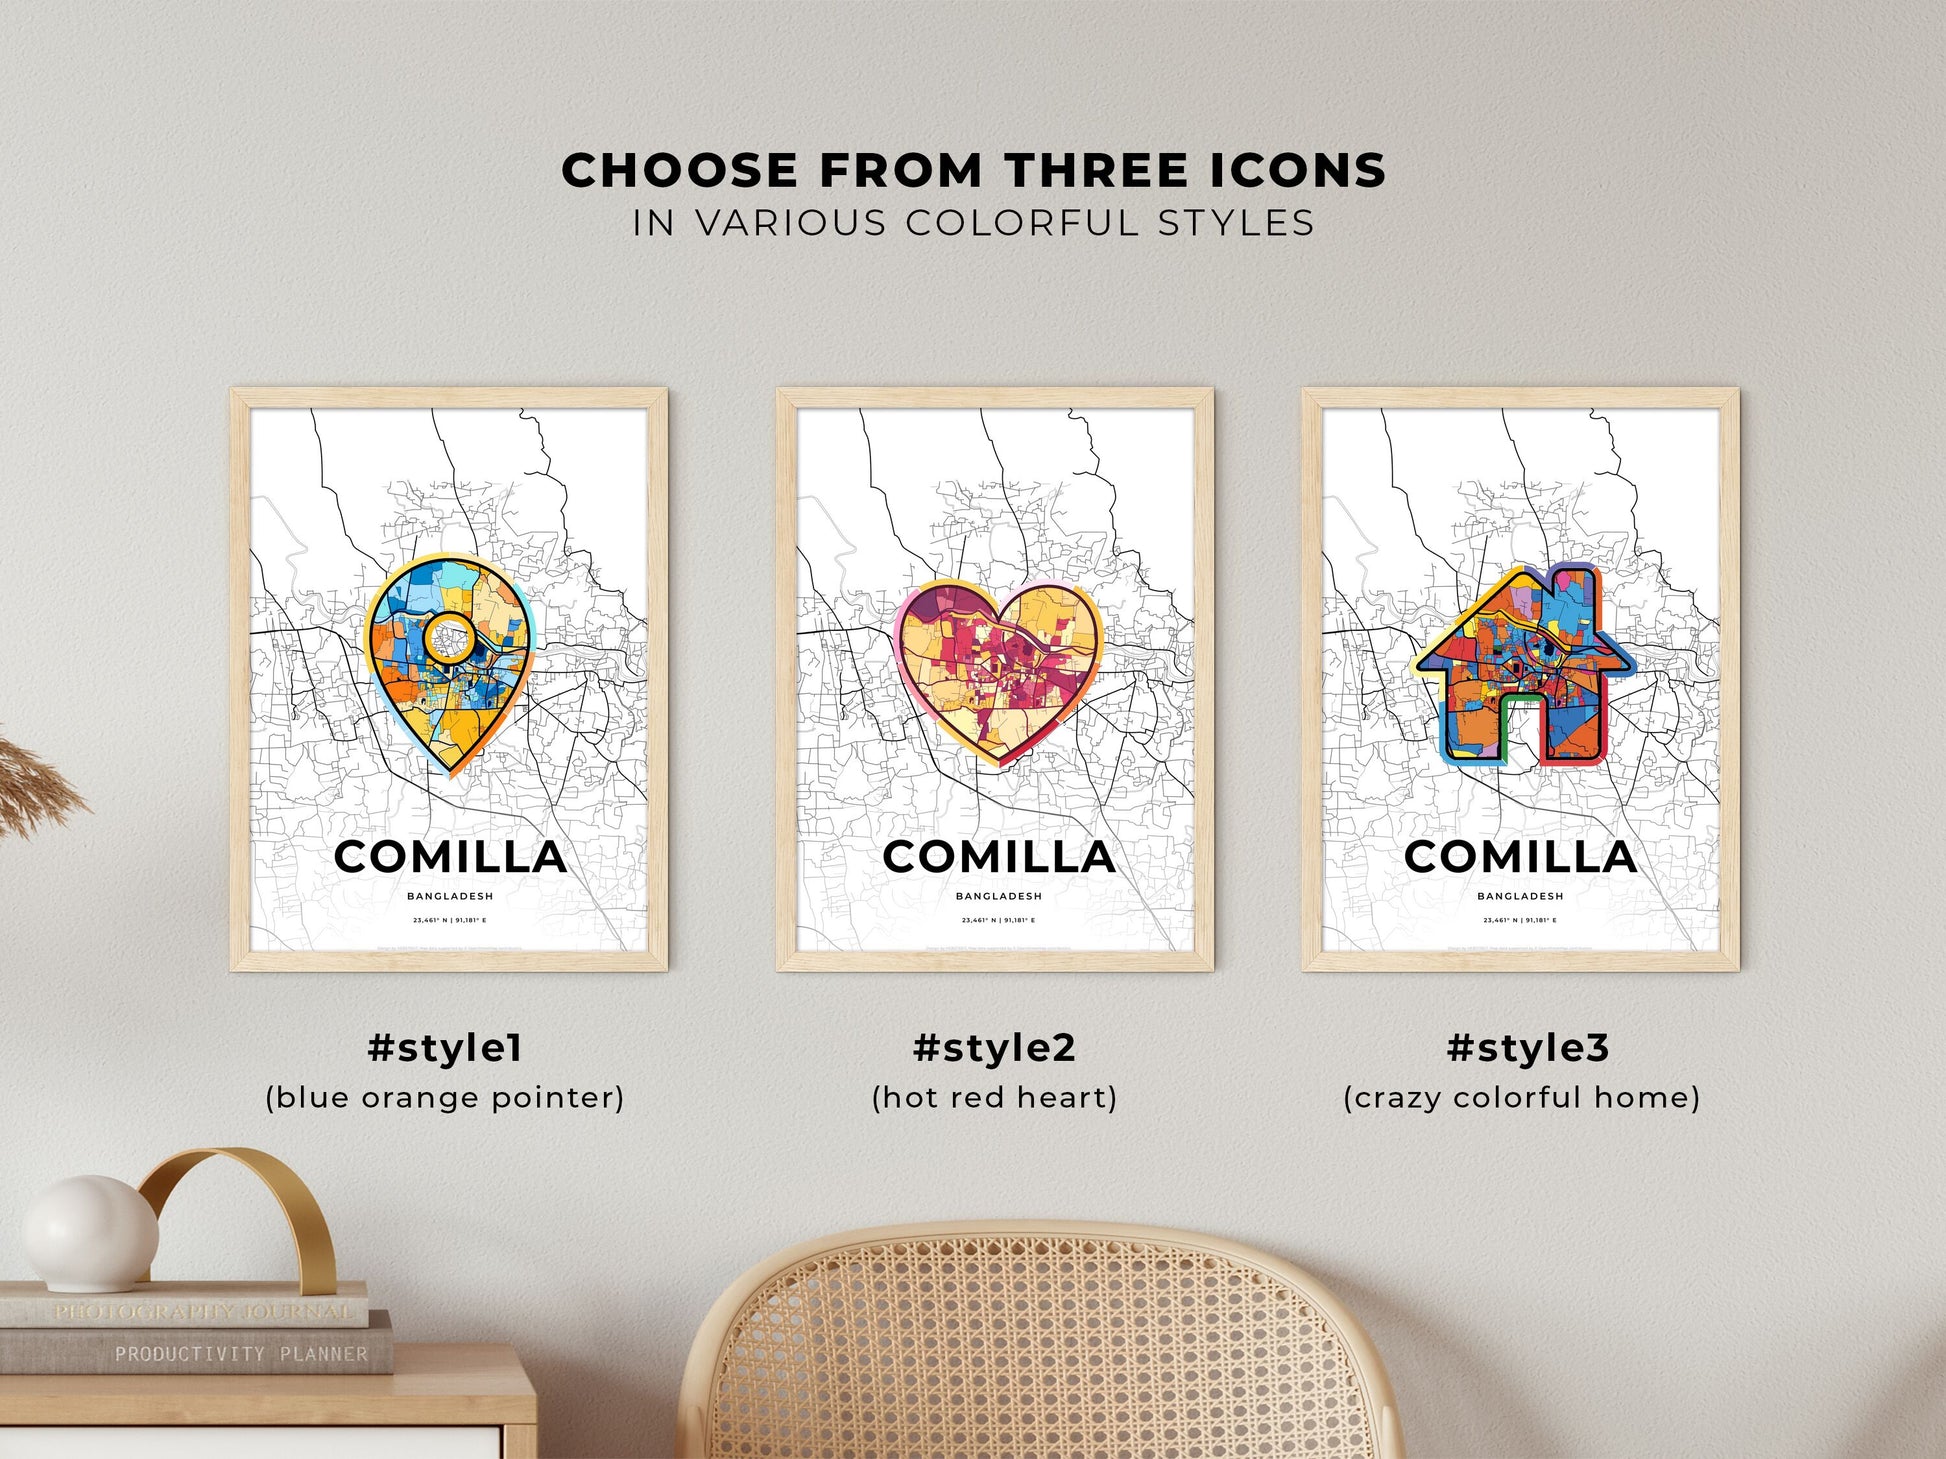 COMILLA BANGLADESH minimal art map with a colorful icon. Where it all began, Couple map gift.